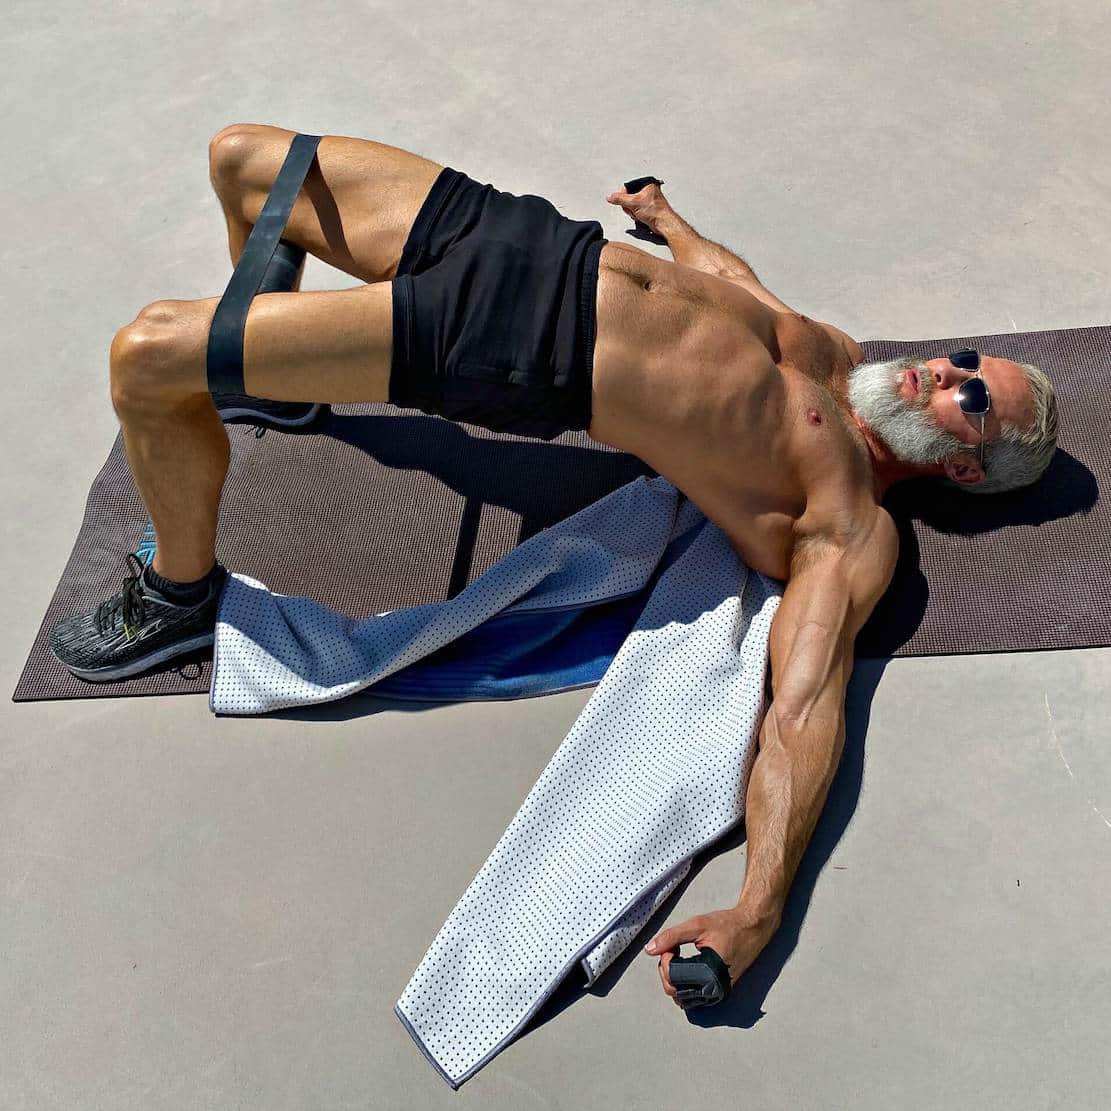 Silver-bearded man does glute bridge exercise with resistance bands.